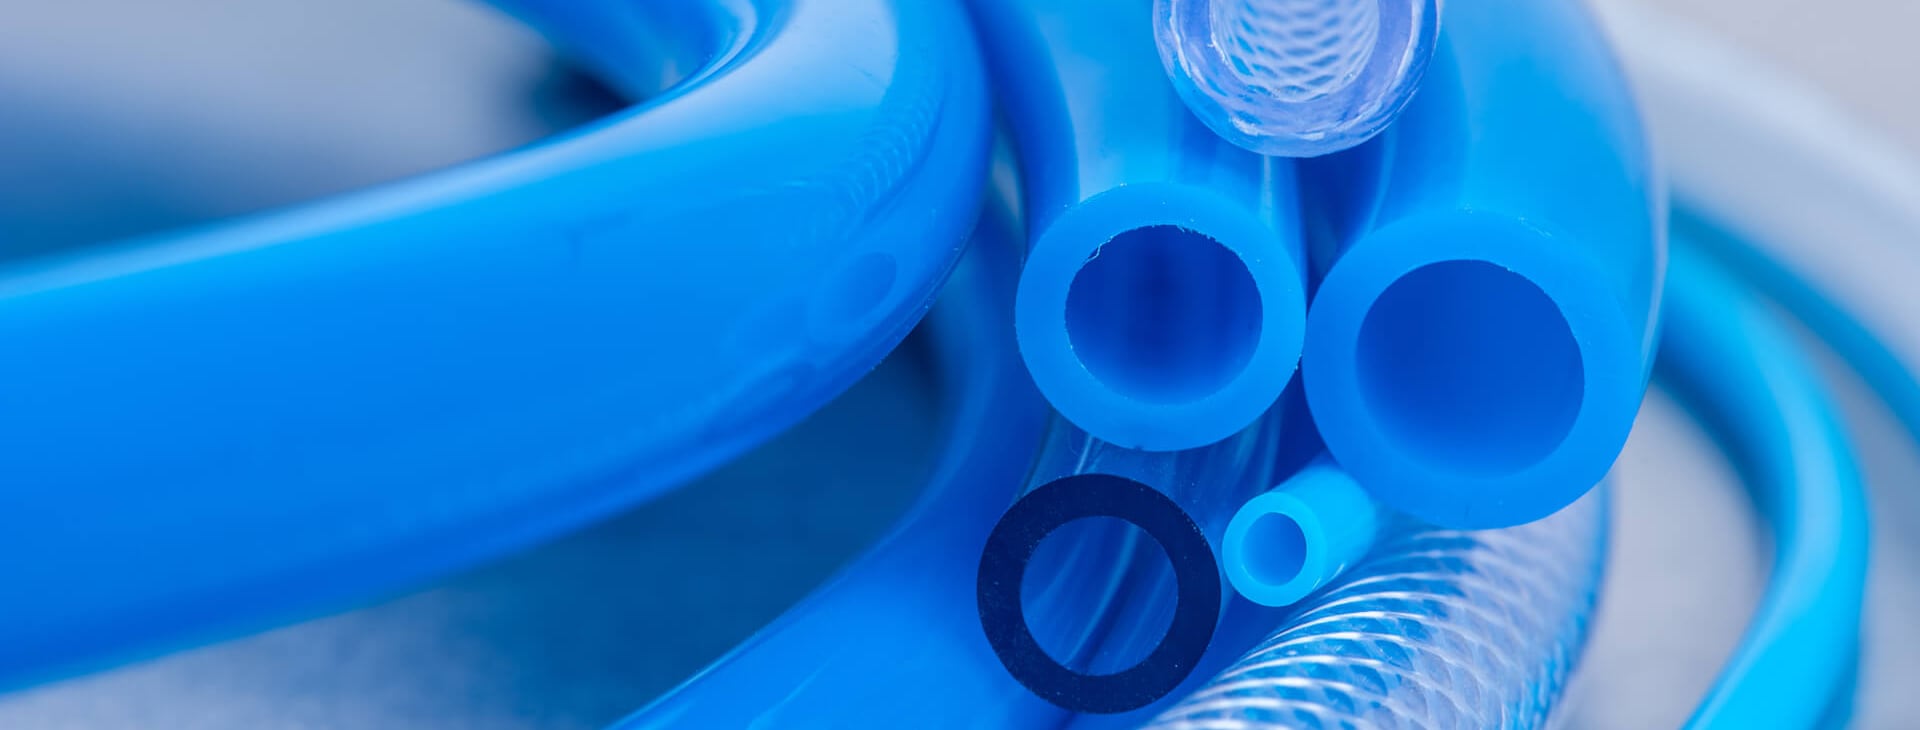 Blue Medical extrusion medical tubing applications